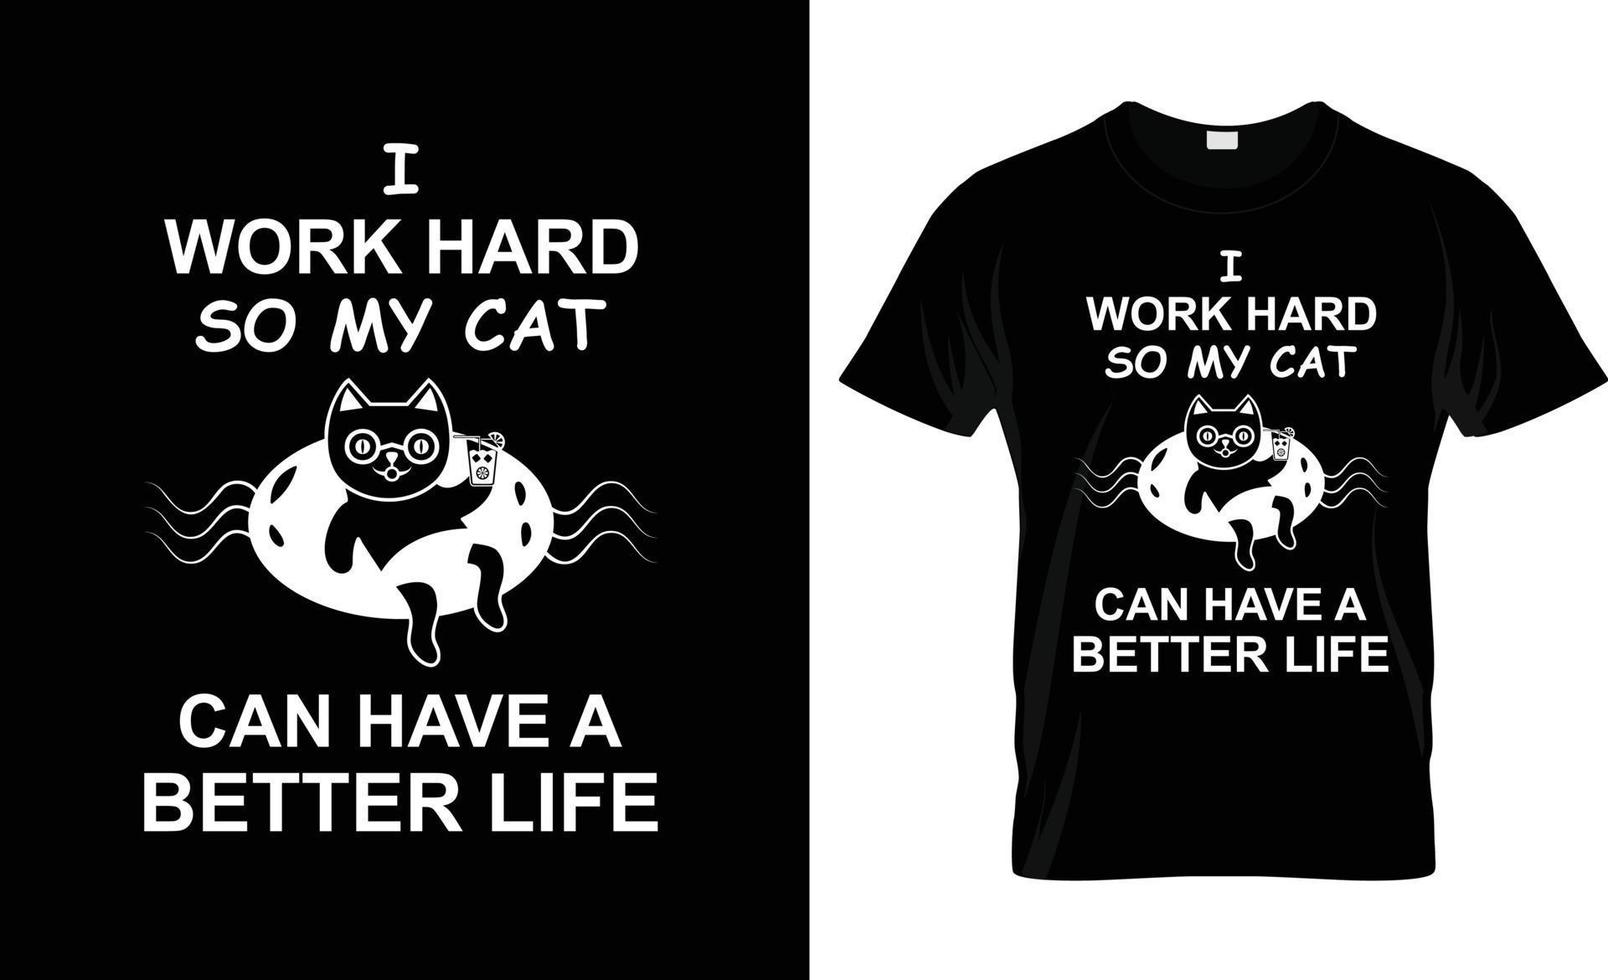 I work hard so my cat can have a better life Quote T-shirt design and cartoon combine T-shirt design vector